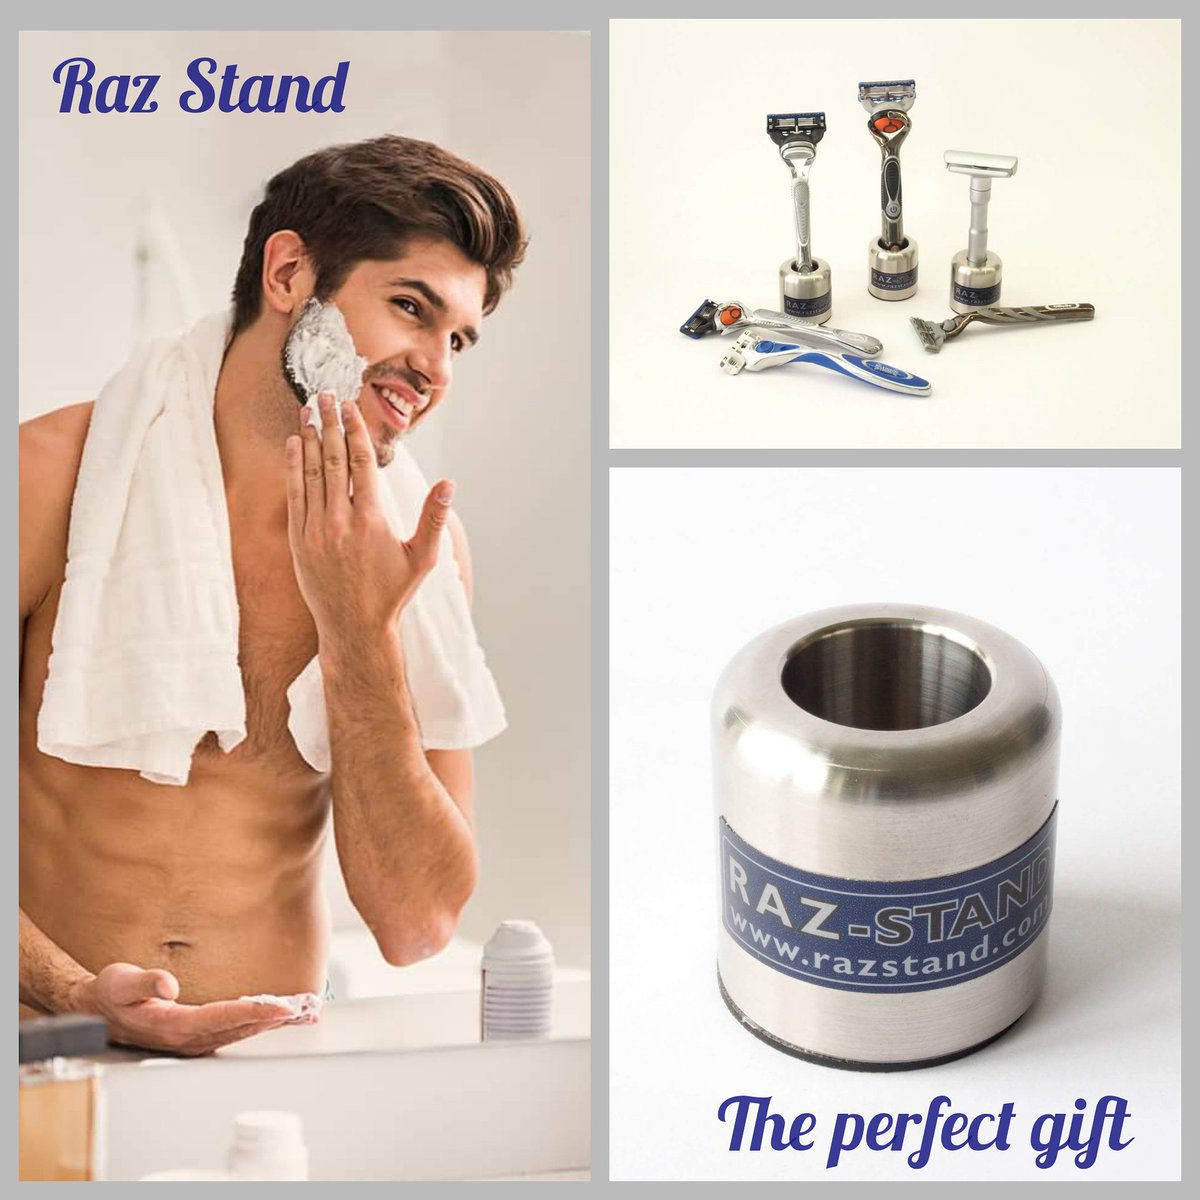 Everyone's talking about the Royal Wedding but who's planning their own wedding? Struggling to find that perfect thank you gift for the Best Man or Ushers? Visit razstand.com #bestmangift #weddingthankyougifts #weddingushergift #royalwedding